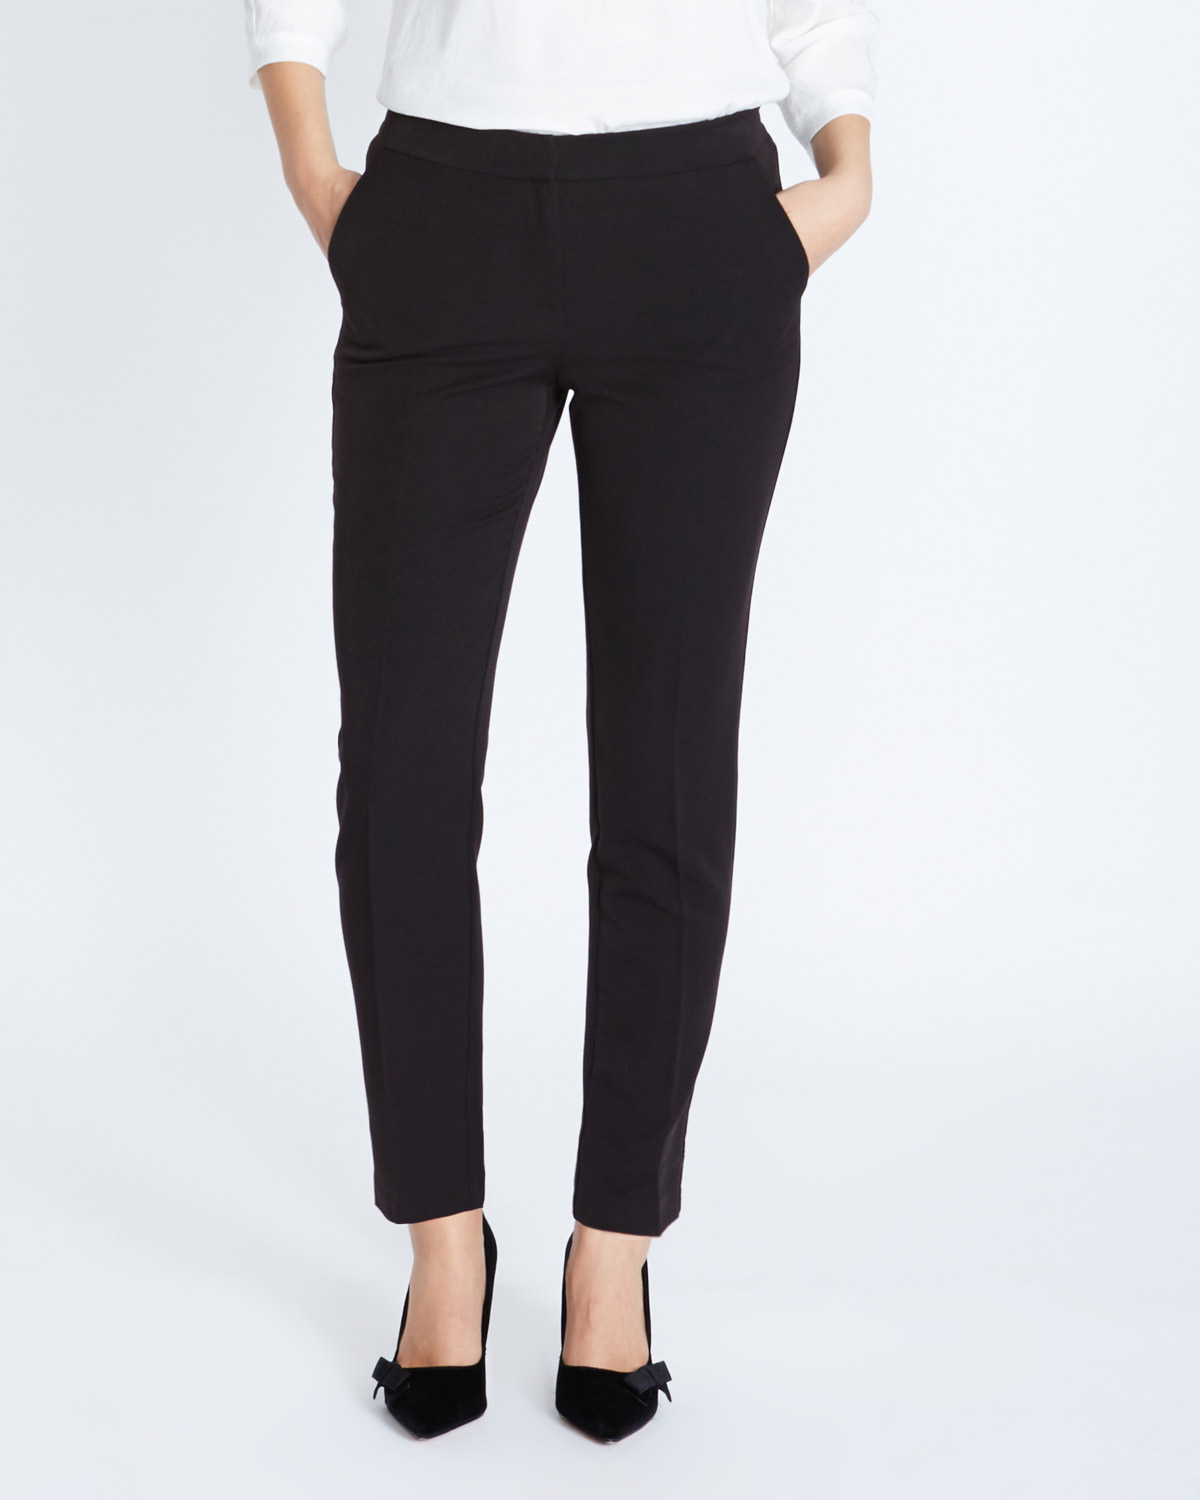 Oprah's 'favorite' Spanx pants are on sale for Black Friday